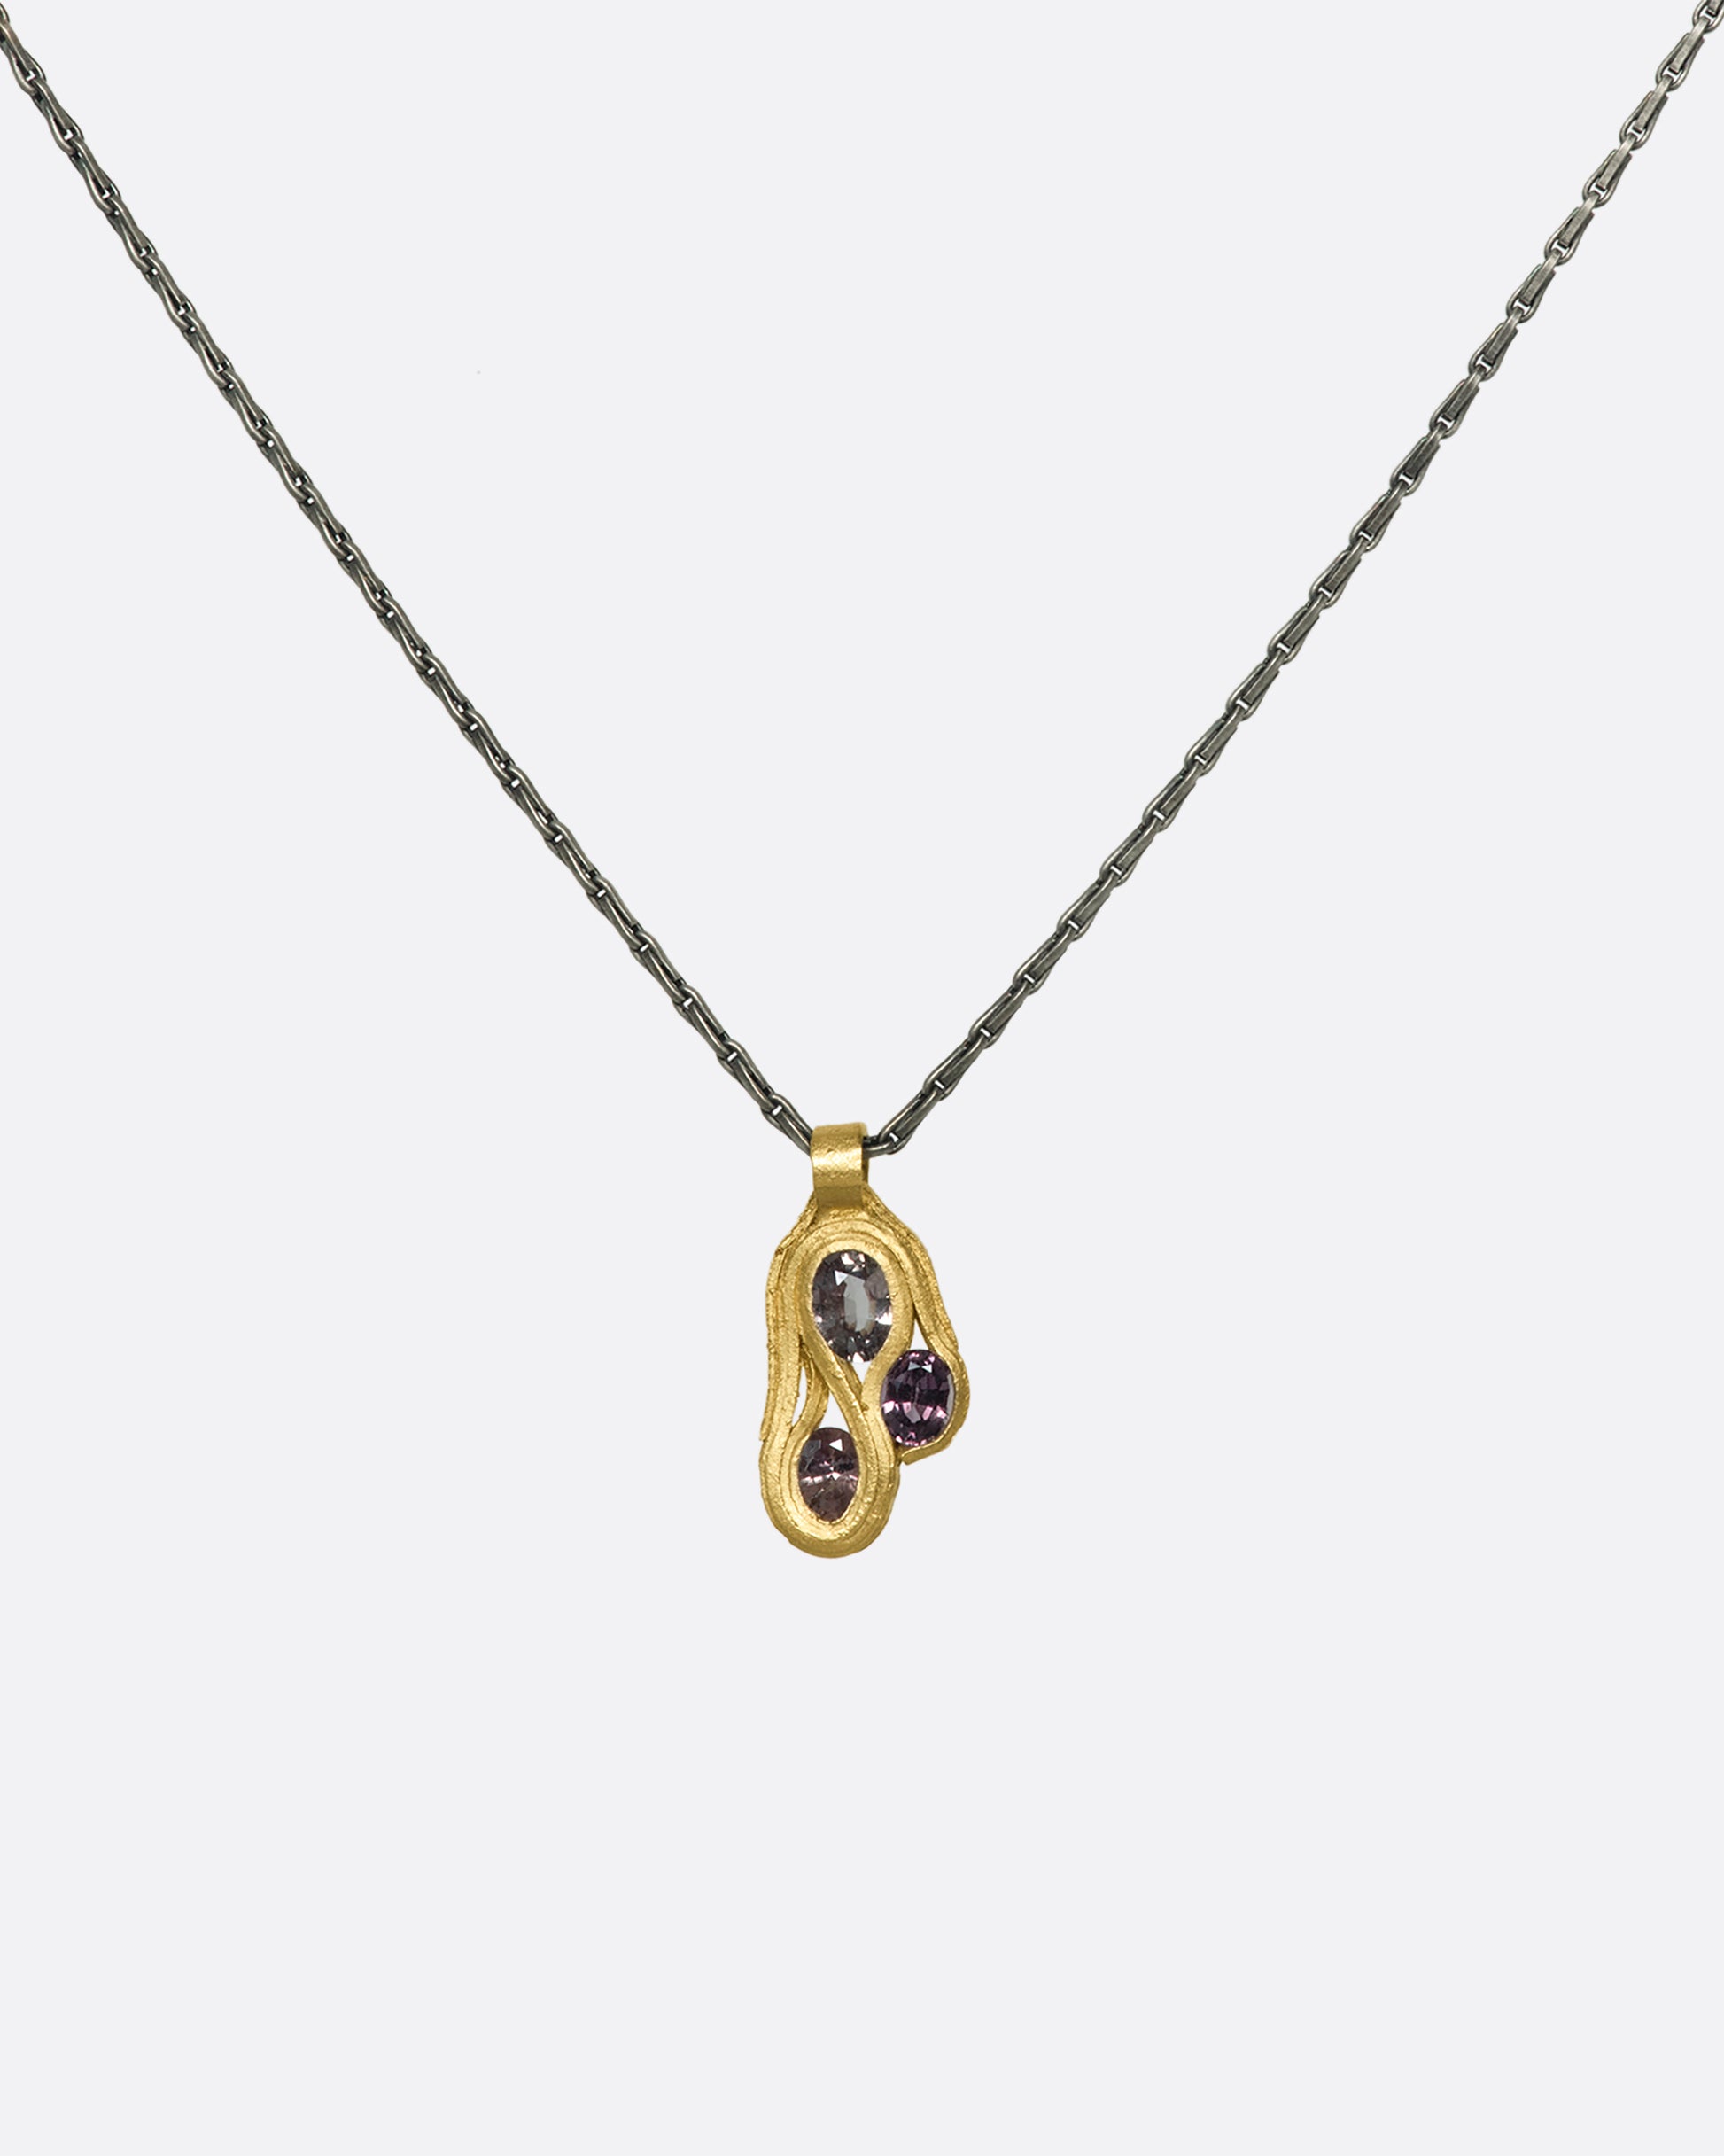 A hanging gold pendant with three pink sapphires on a darkened silver chain.